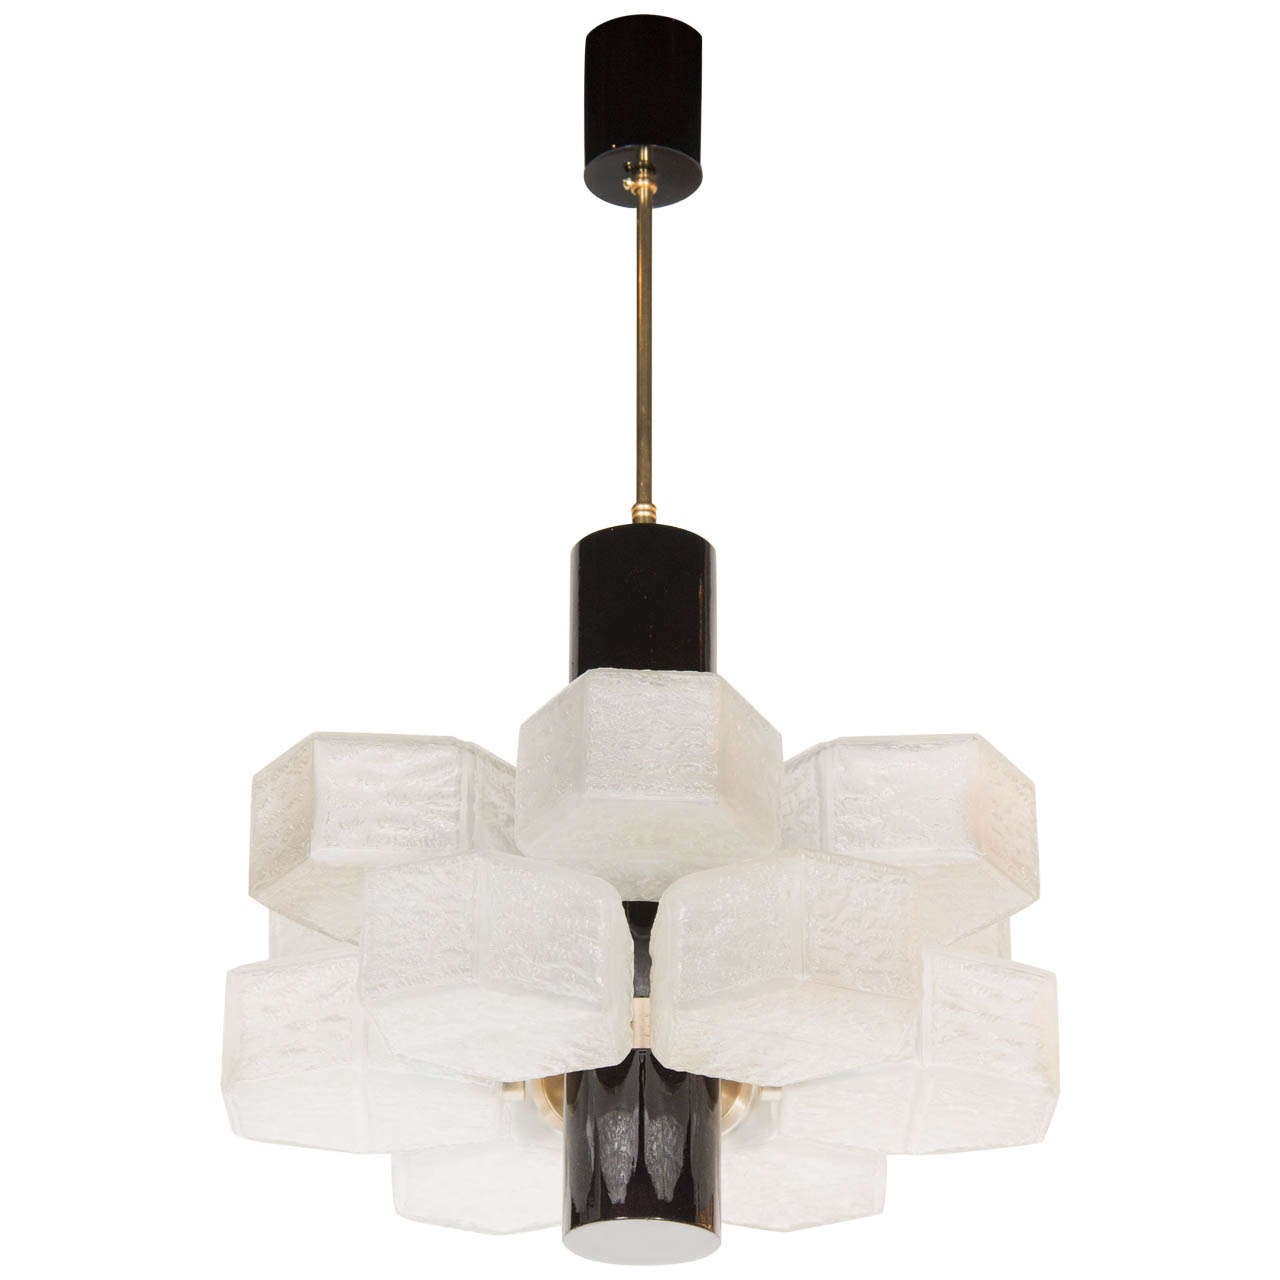 Sophisticated Mid-century Chandelier With Hexagonal Glass Globes